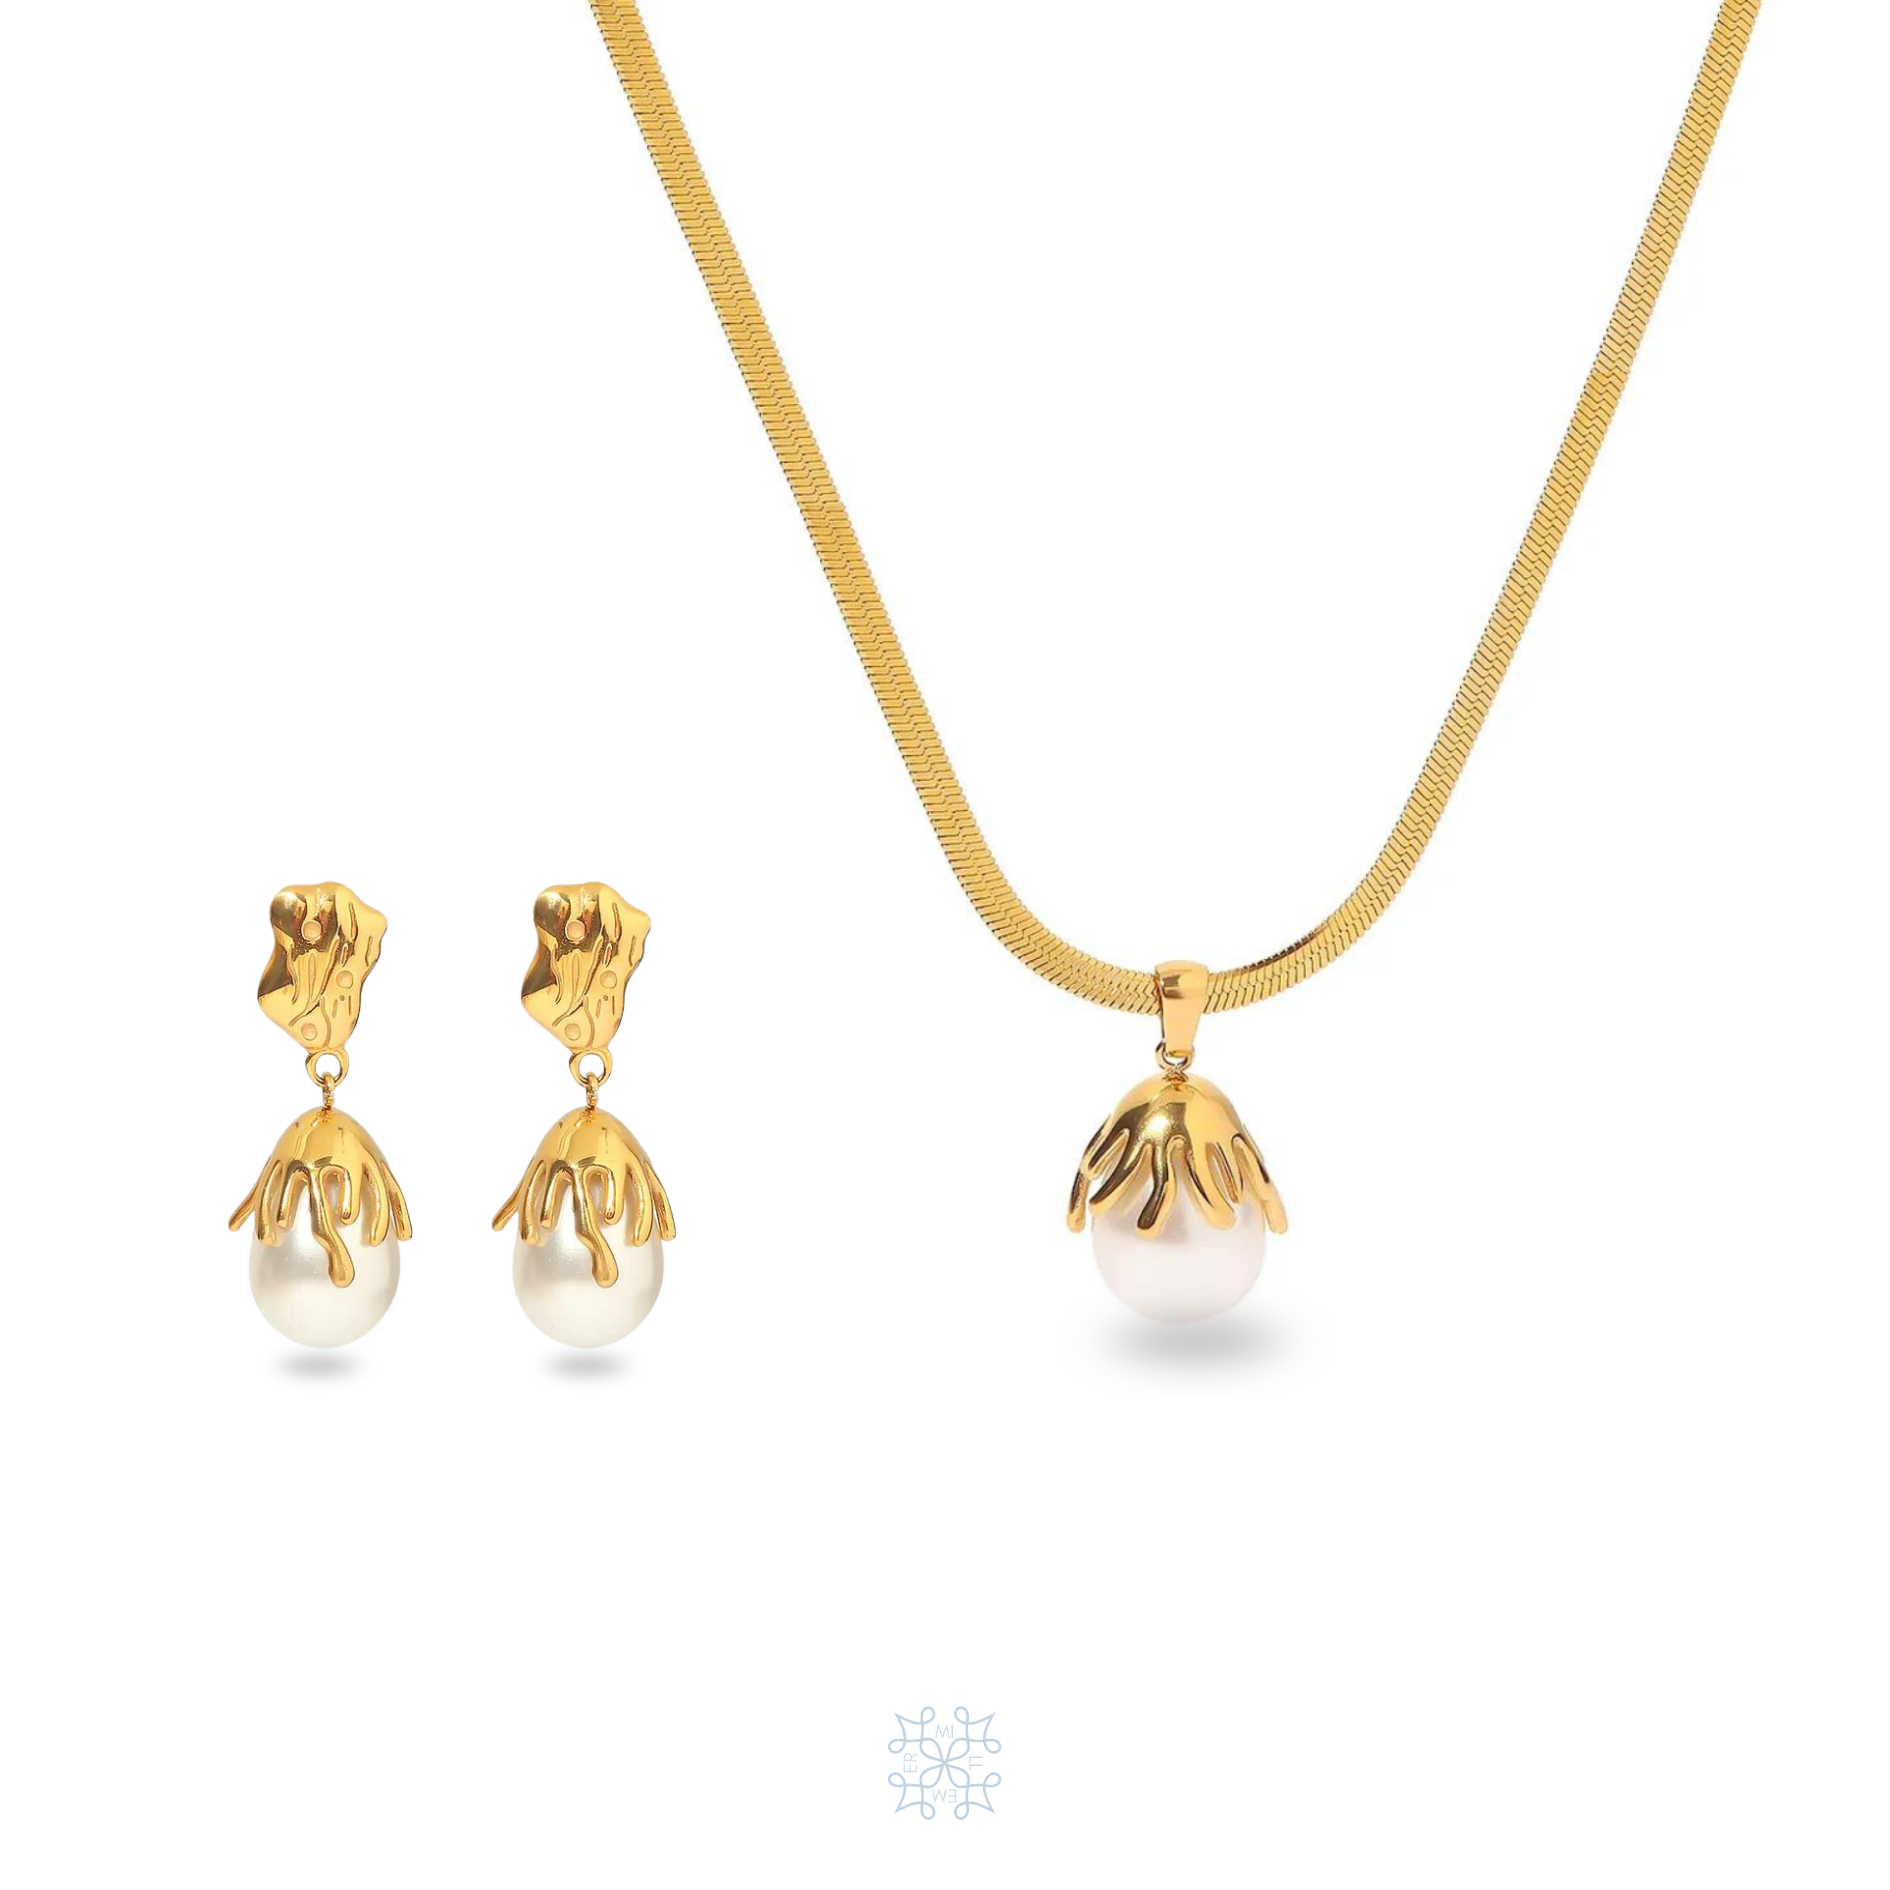 A gold set with earrings and necklace. The necklace has a snake herringbone pattern chain. A flower pendant with pearl attached in the coral flower shape. The same design the pearl flower gold coral earrings.